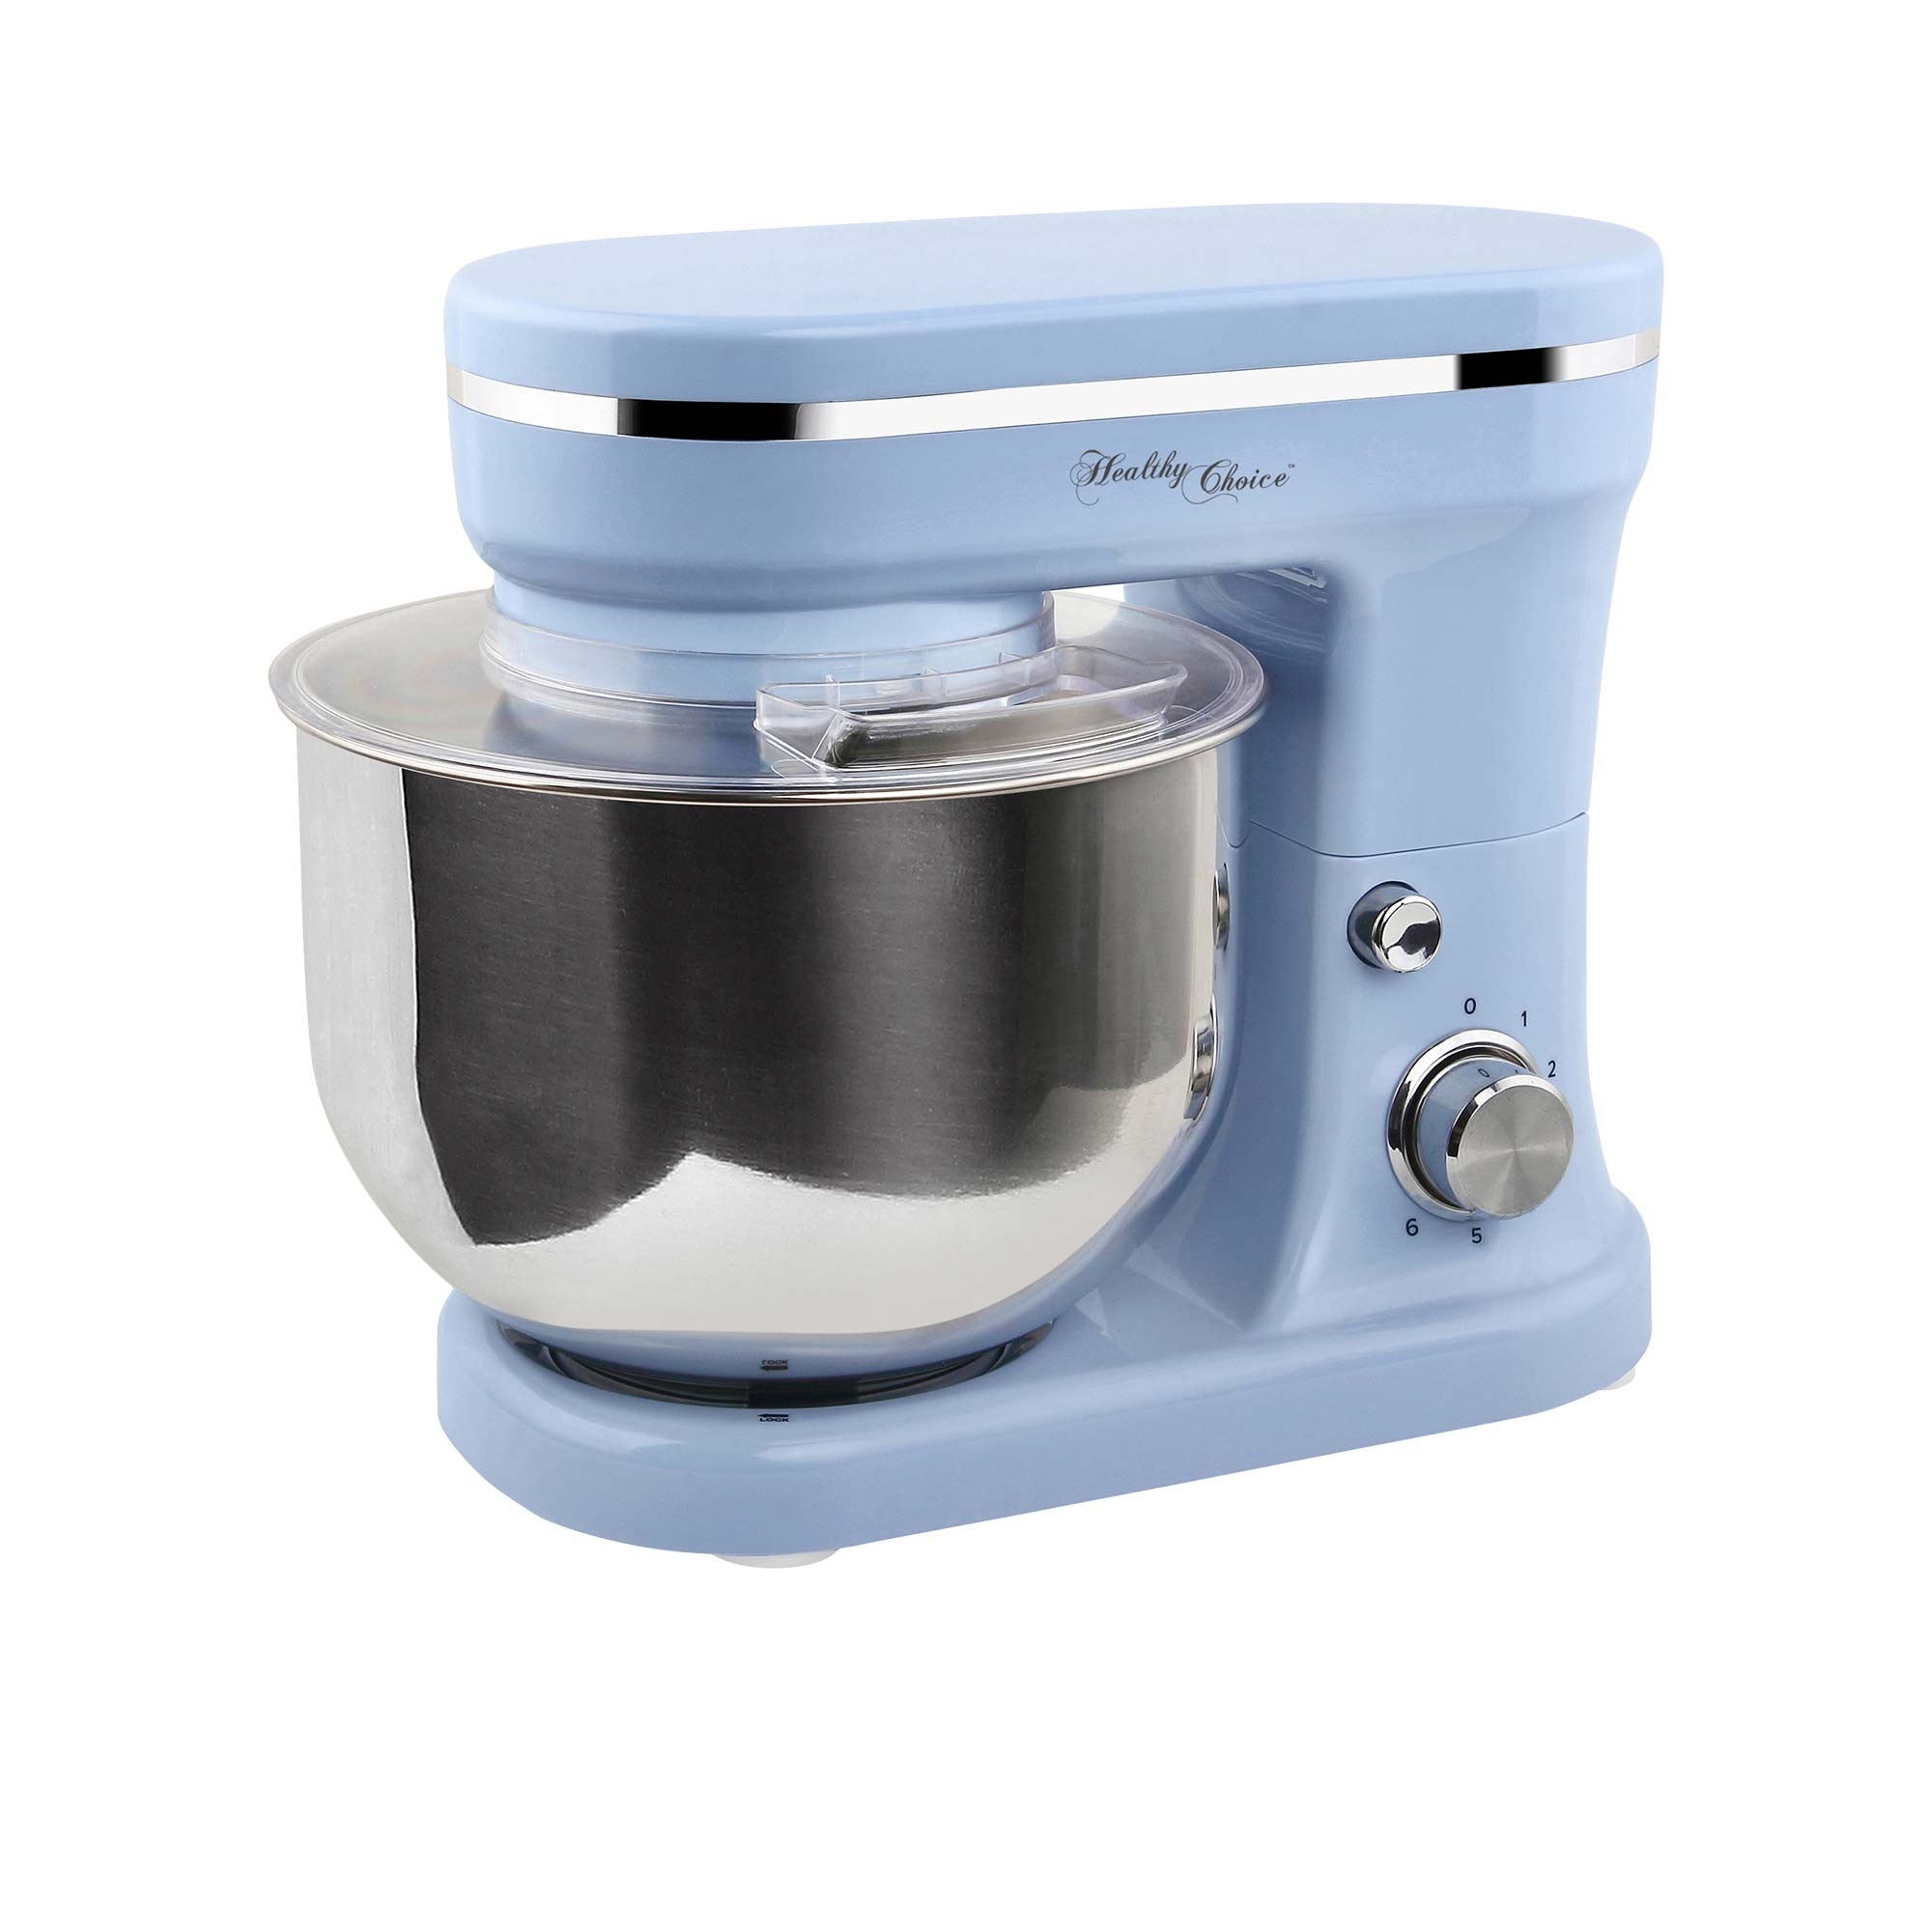 Healthy Choice Mix Master Stand Mixer Blue Image 1